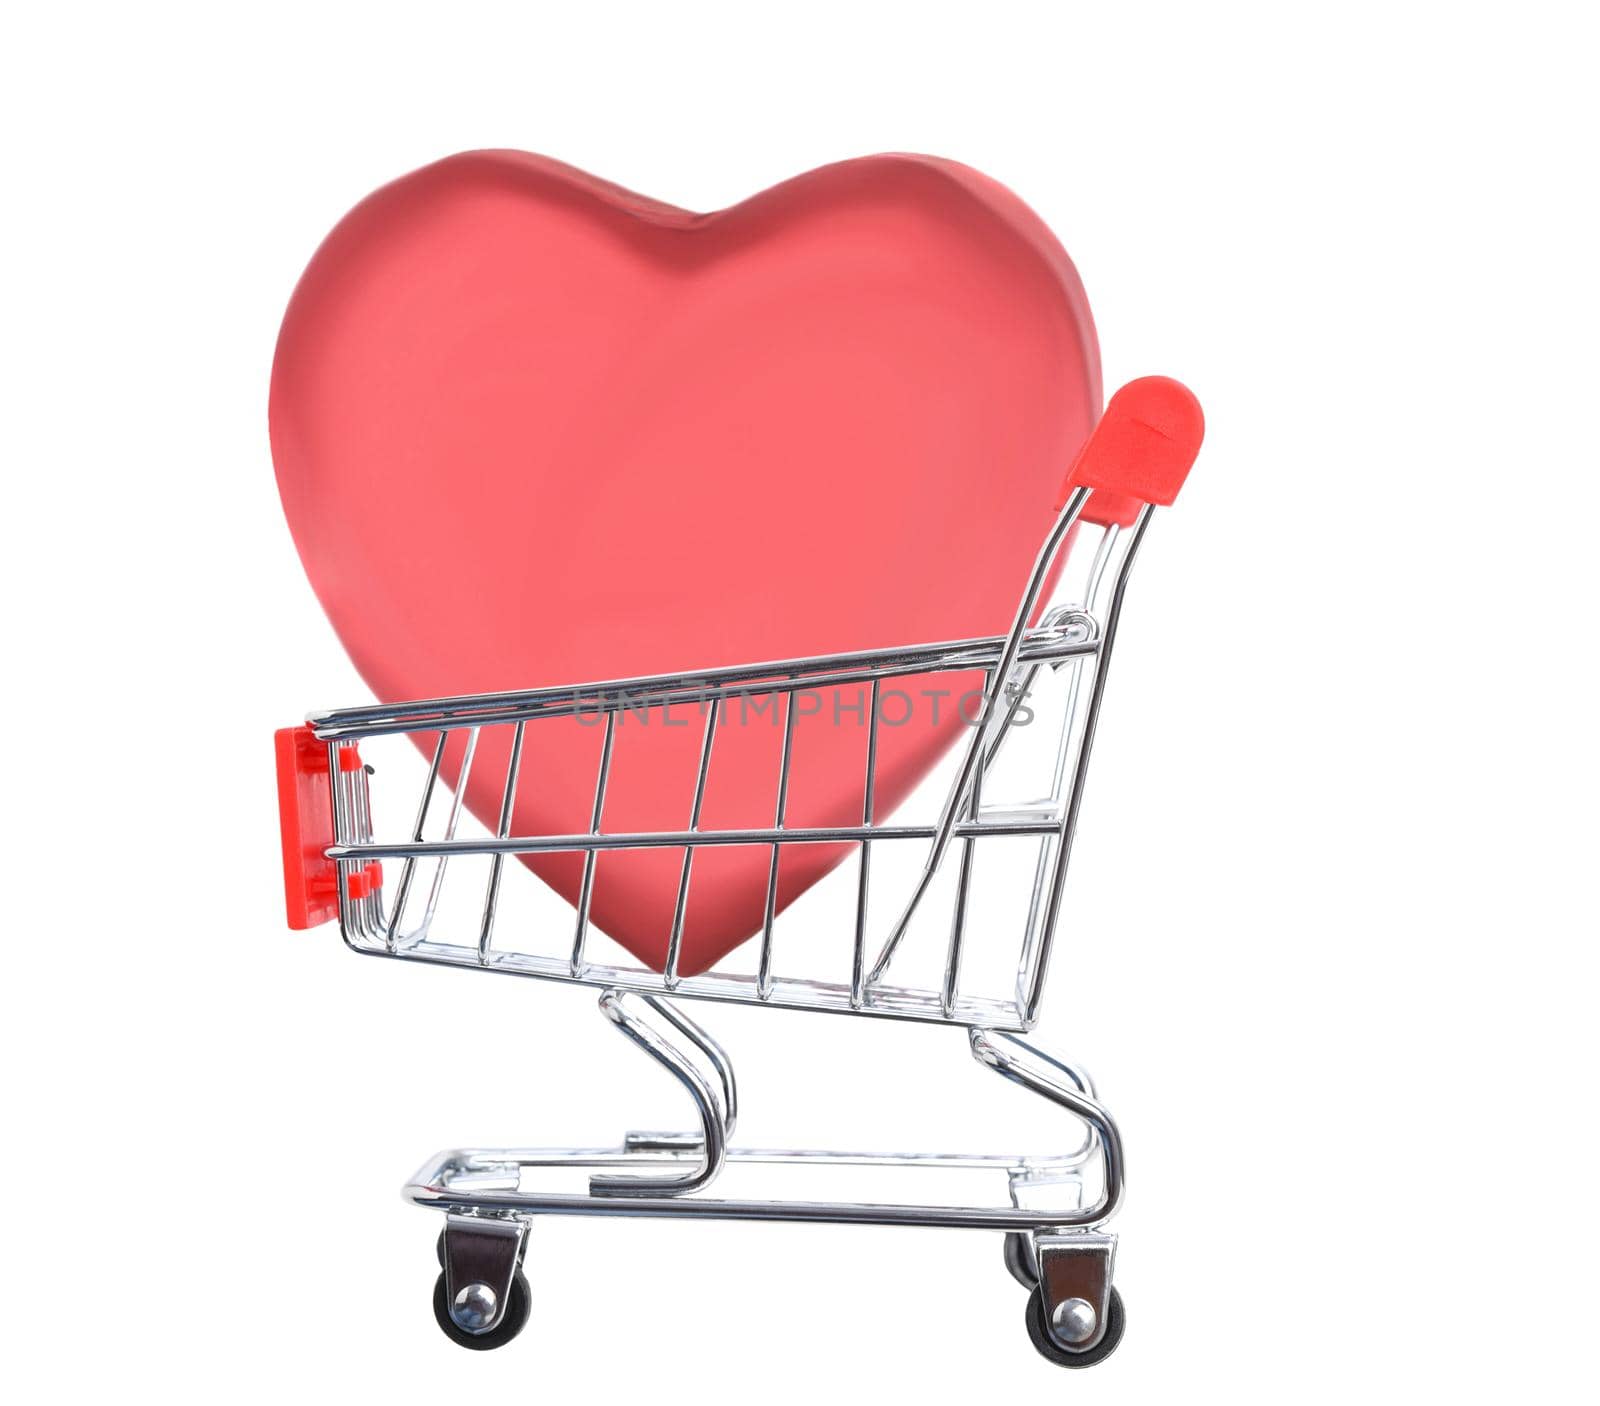 Valentines Day Concept. A large heart shaped candy box inside a grocery shopping cart, isolated on white.  by sCukrov